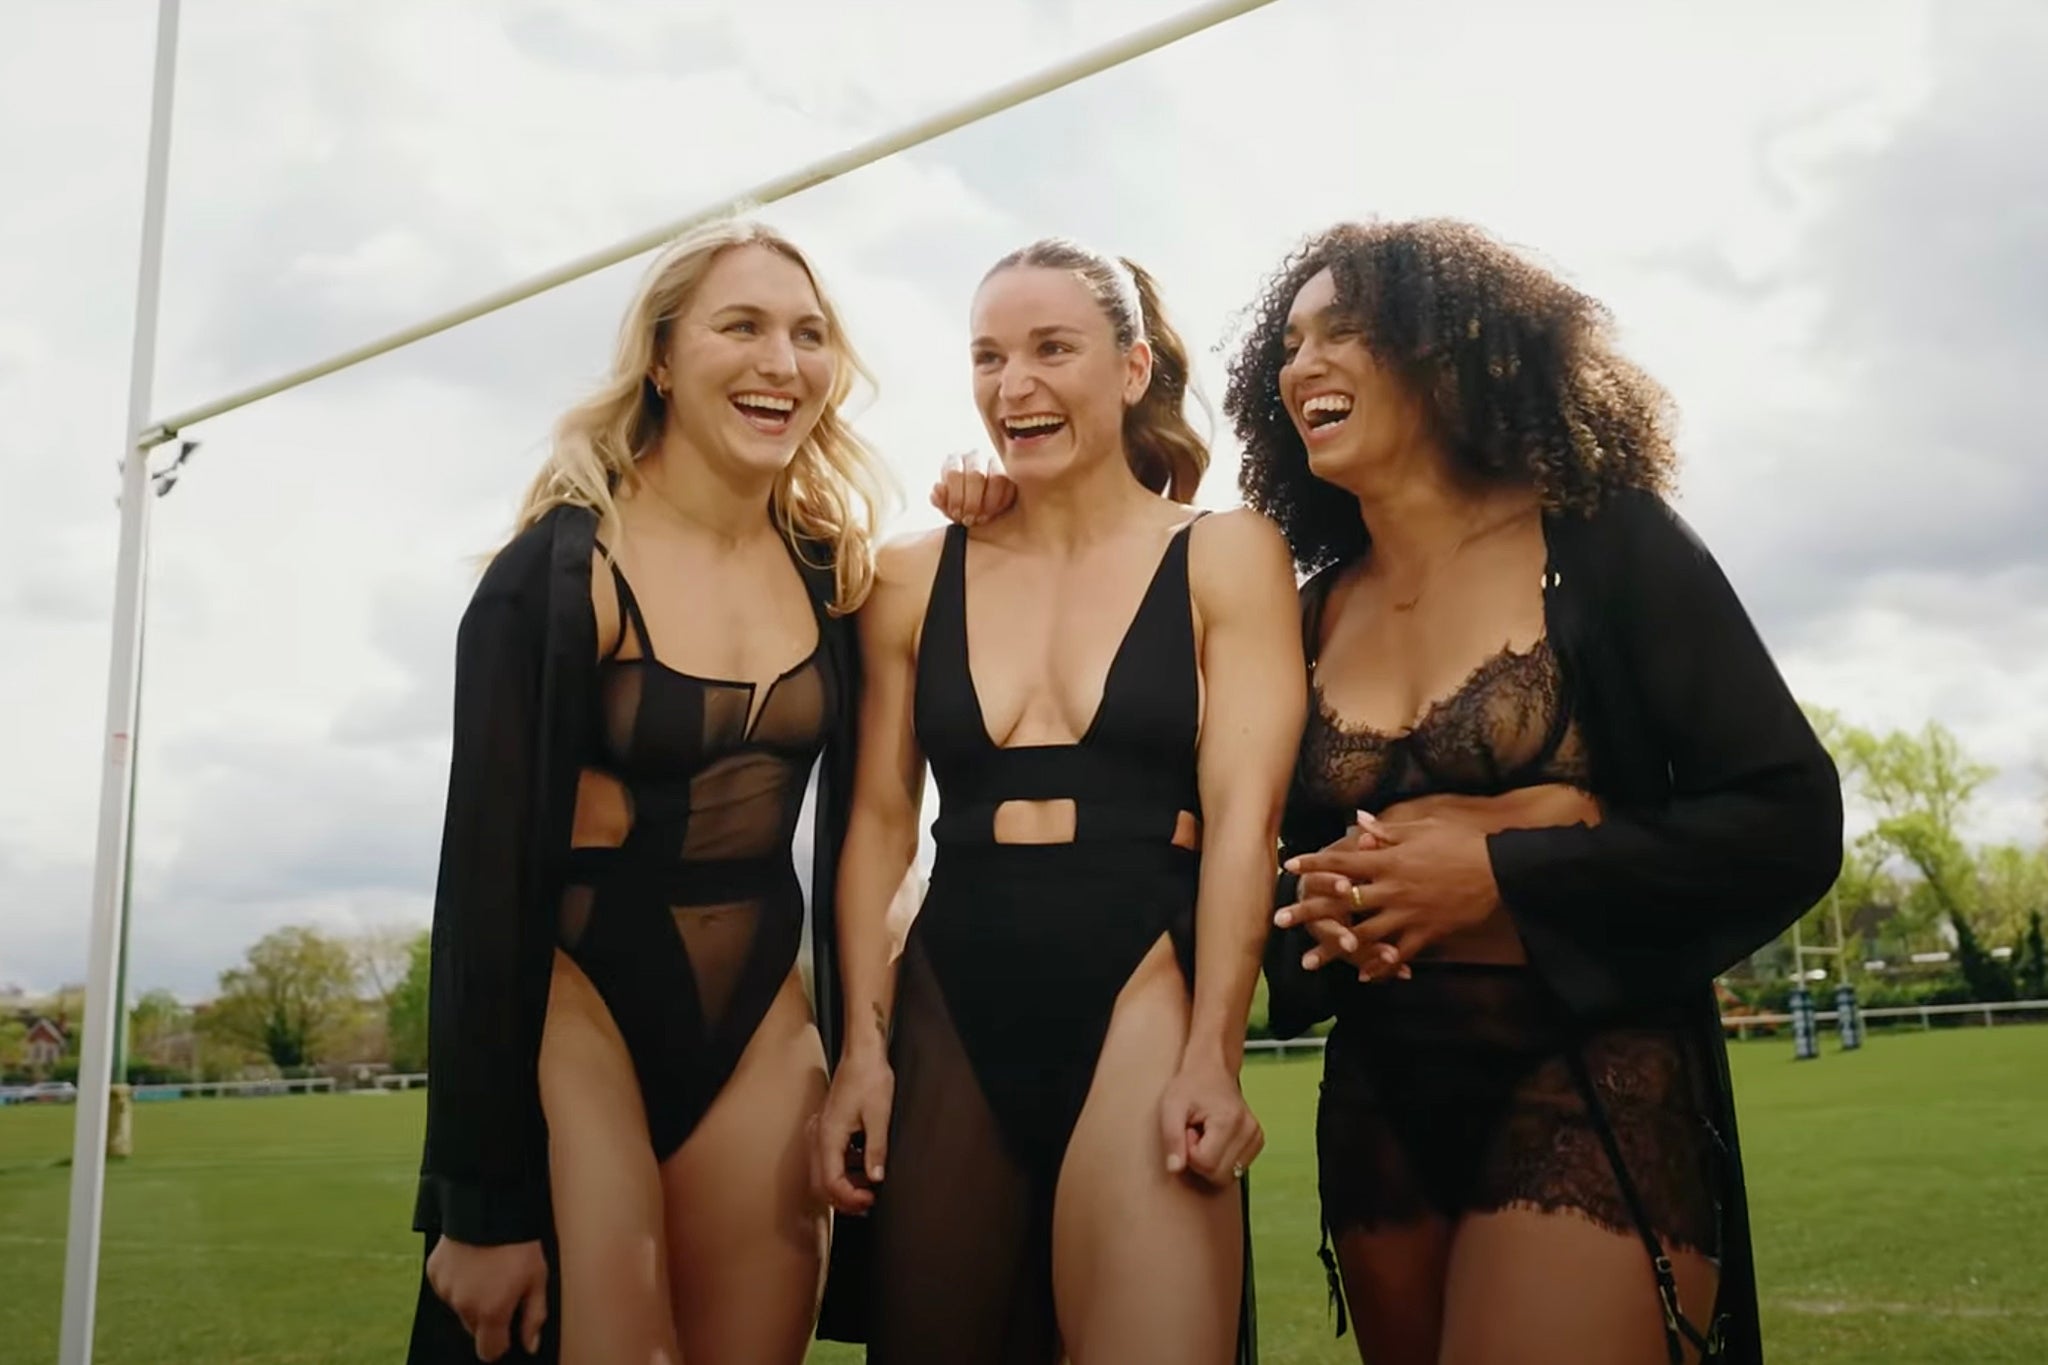 Members of Great Britain’s Rugby 7’s team have posed in their knickers in a lingerie ad